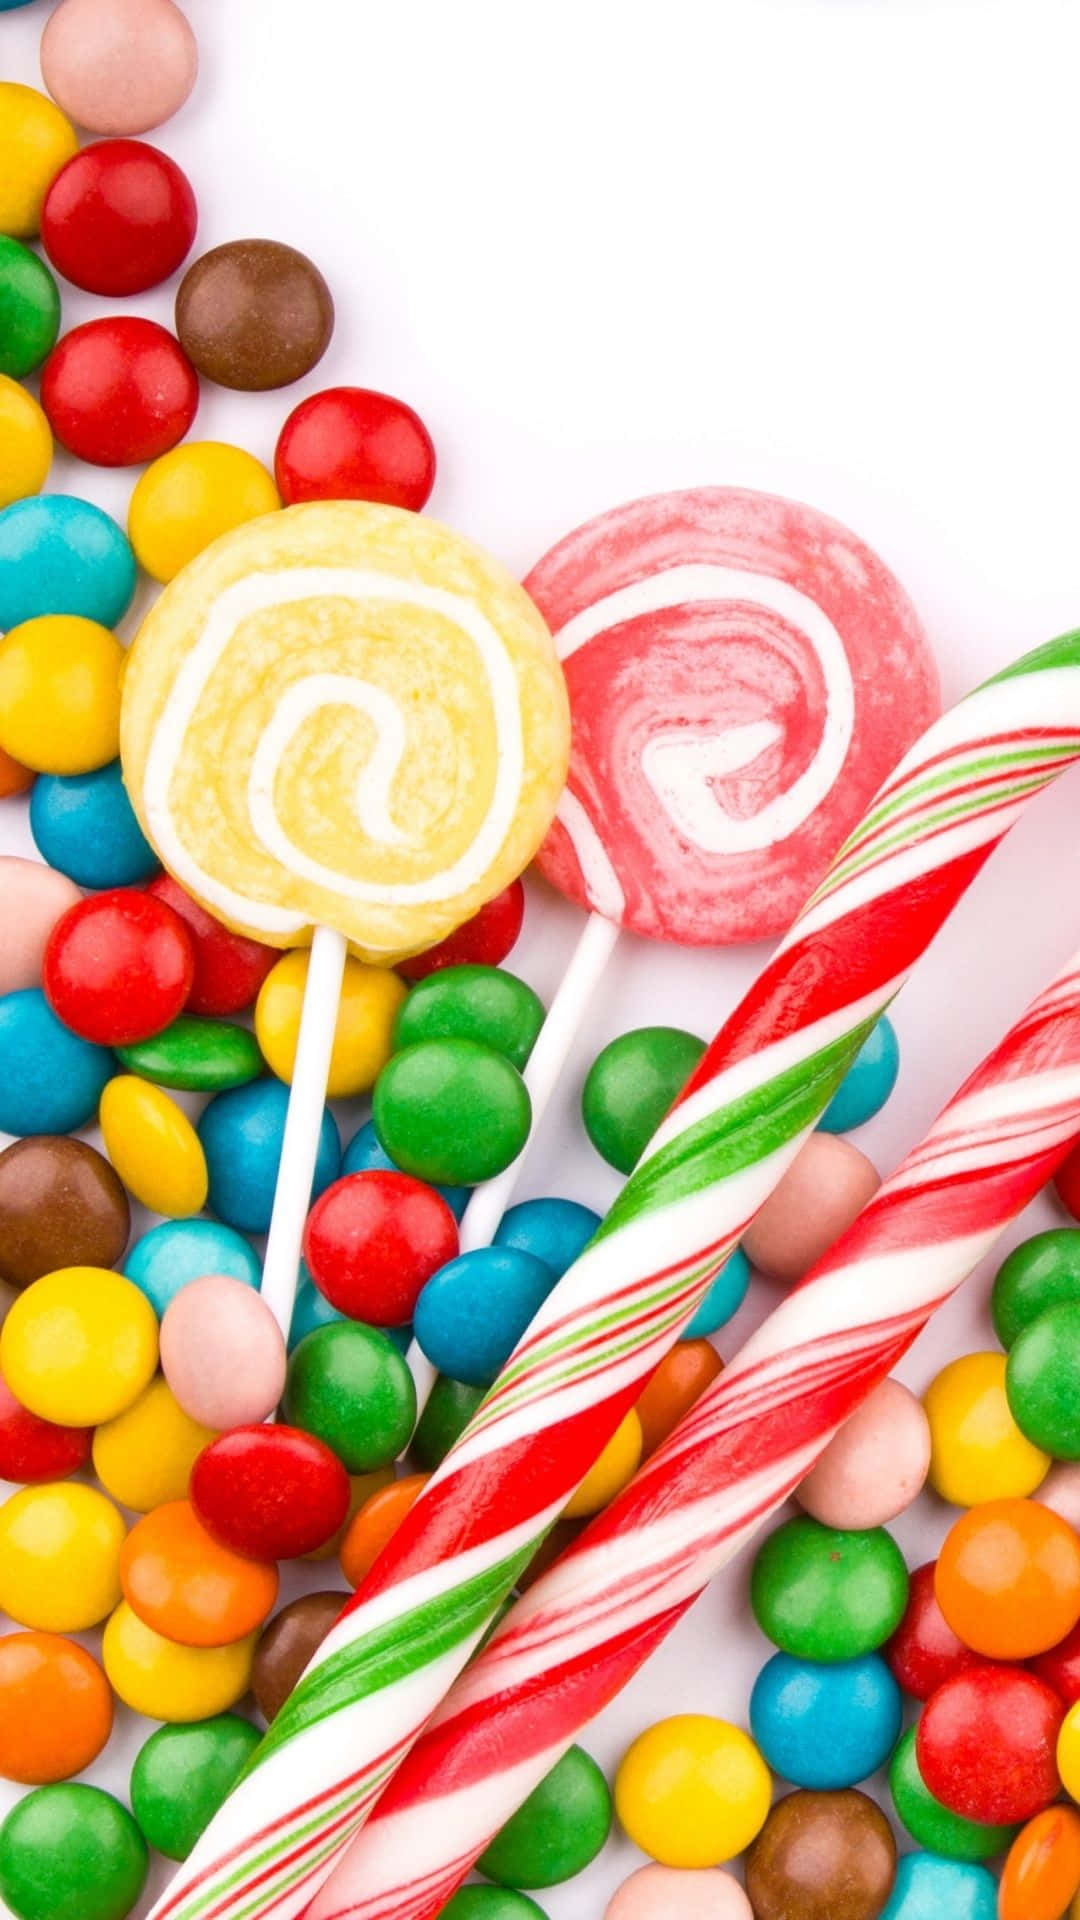 Sweet Delight: A Multi-colored Candy Background